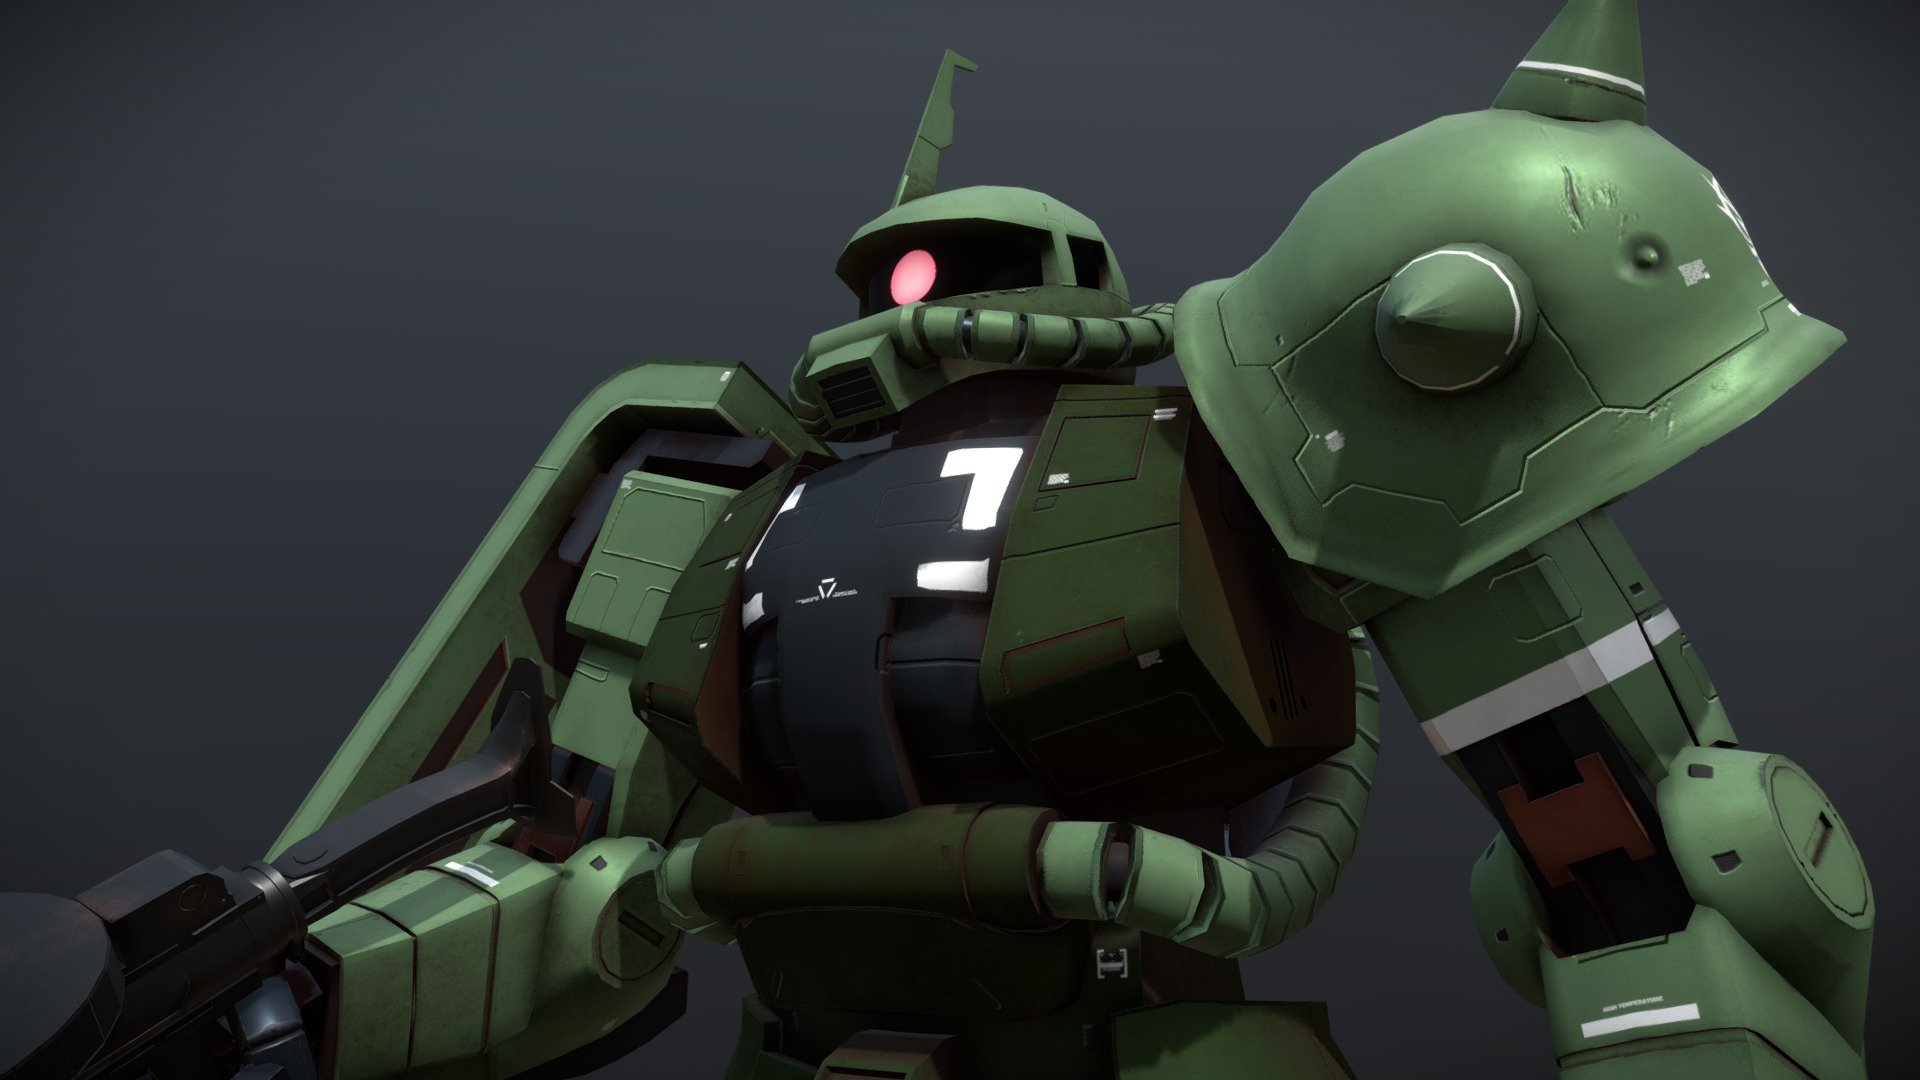 An upgraded version of my previous Zaku model - this time fully rigged with a new coat of paint, and the standard 120mm Machine Gun! I’m pretty much done with this project now, and it’s been a great time going from scratch to a fully textured, rigged, and animated model. I’ve learned so, so much from this project, and I can’t wait to do move onto the next 3d model